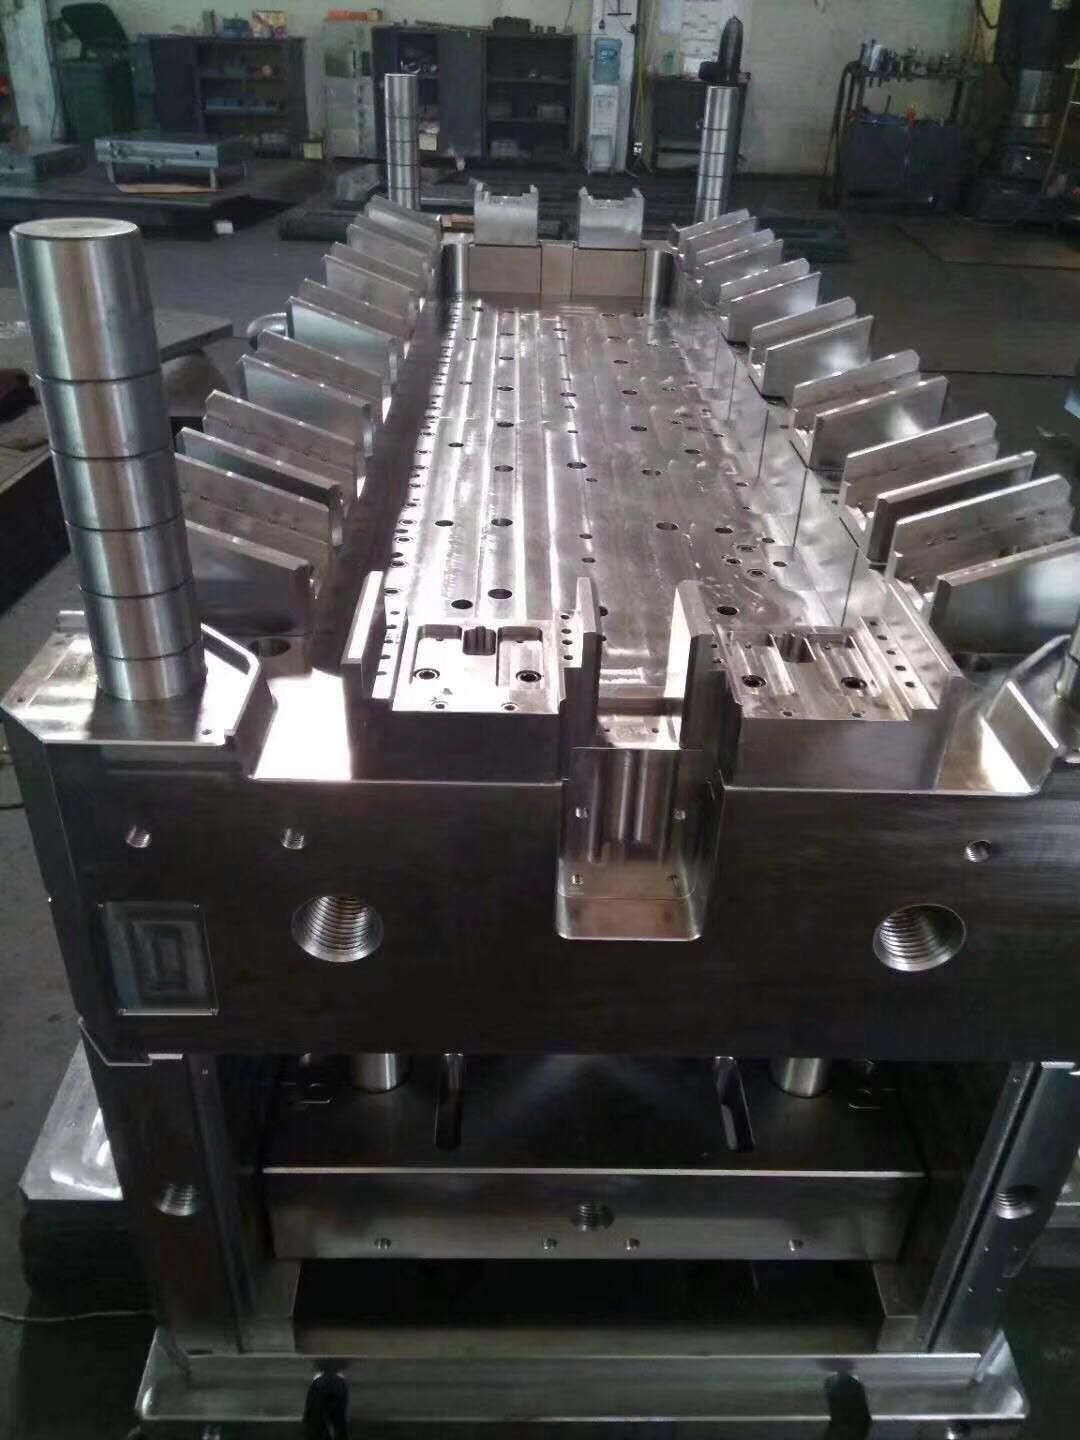 As a plastic mold parts company, what is your production capacity?